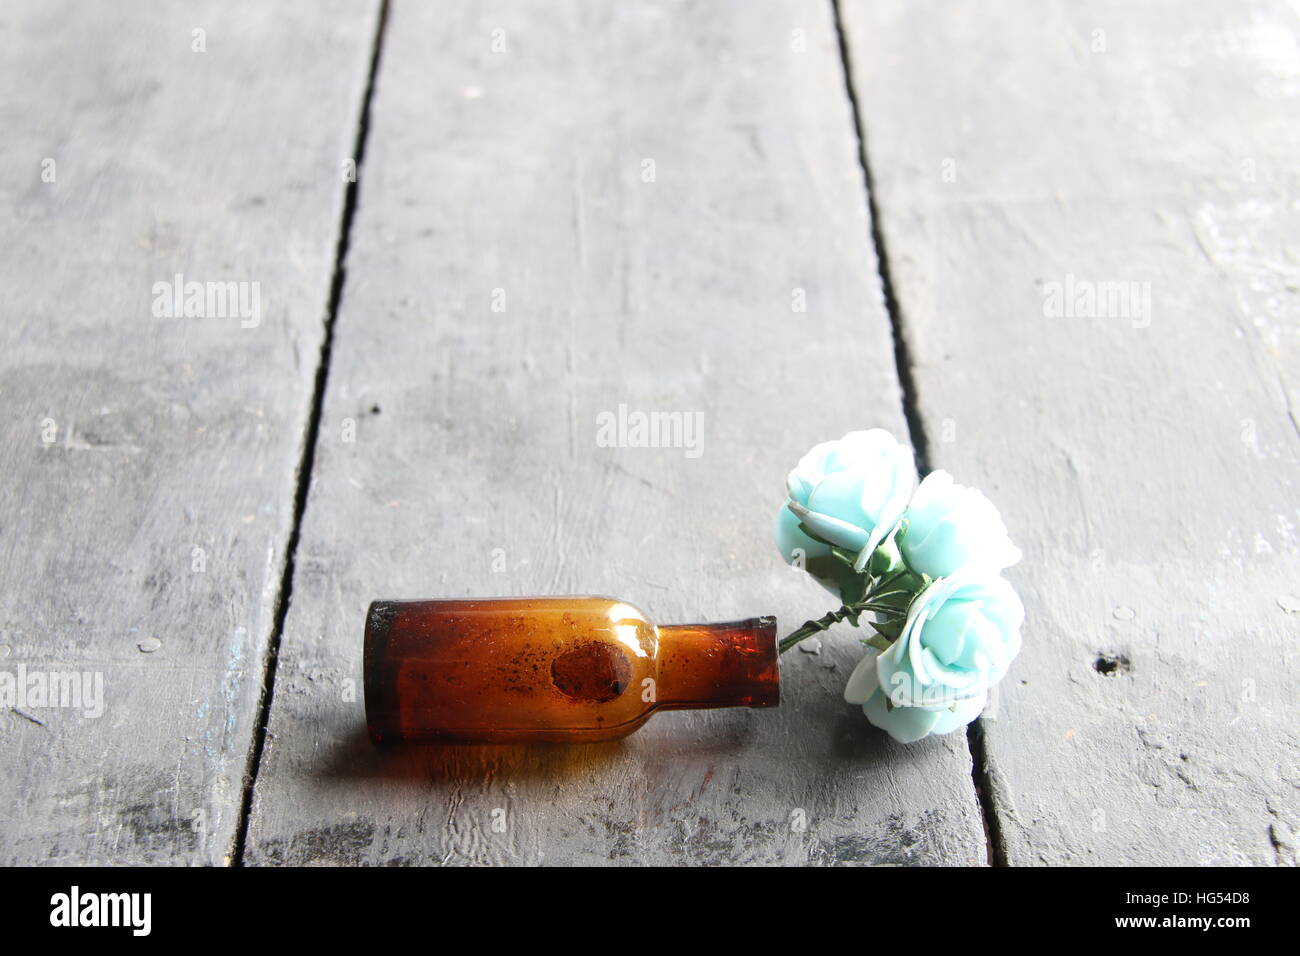 nice flowers in a vintage bottle Stock Photo